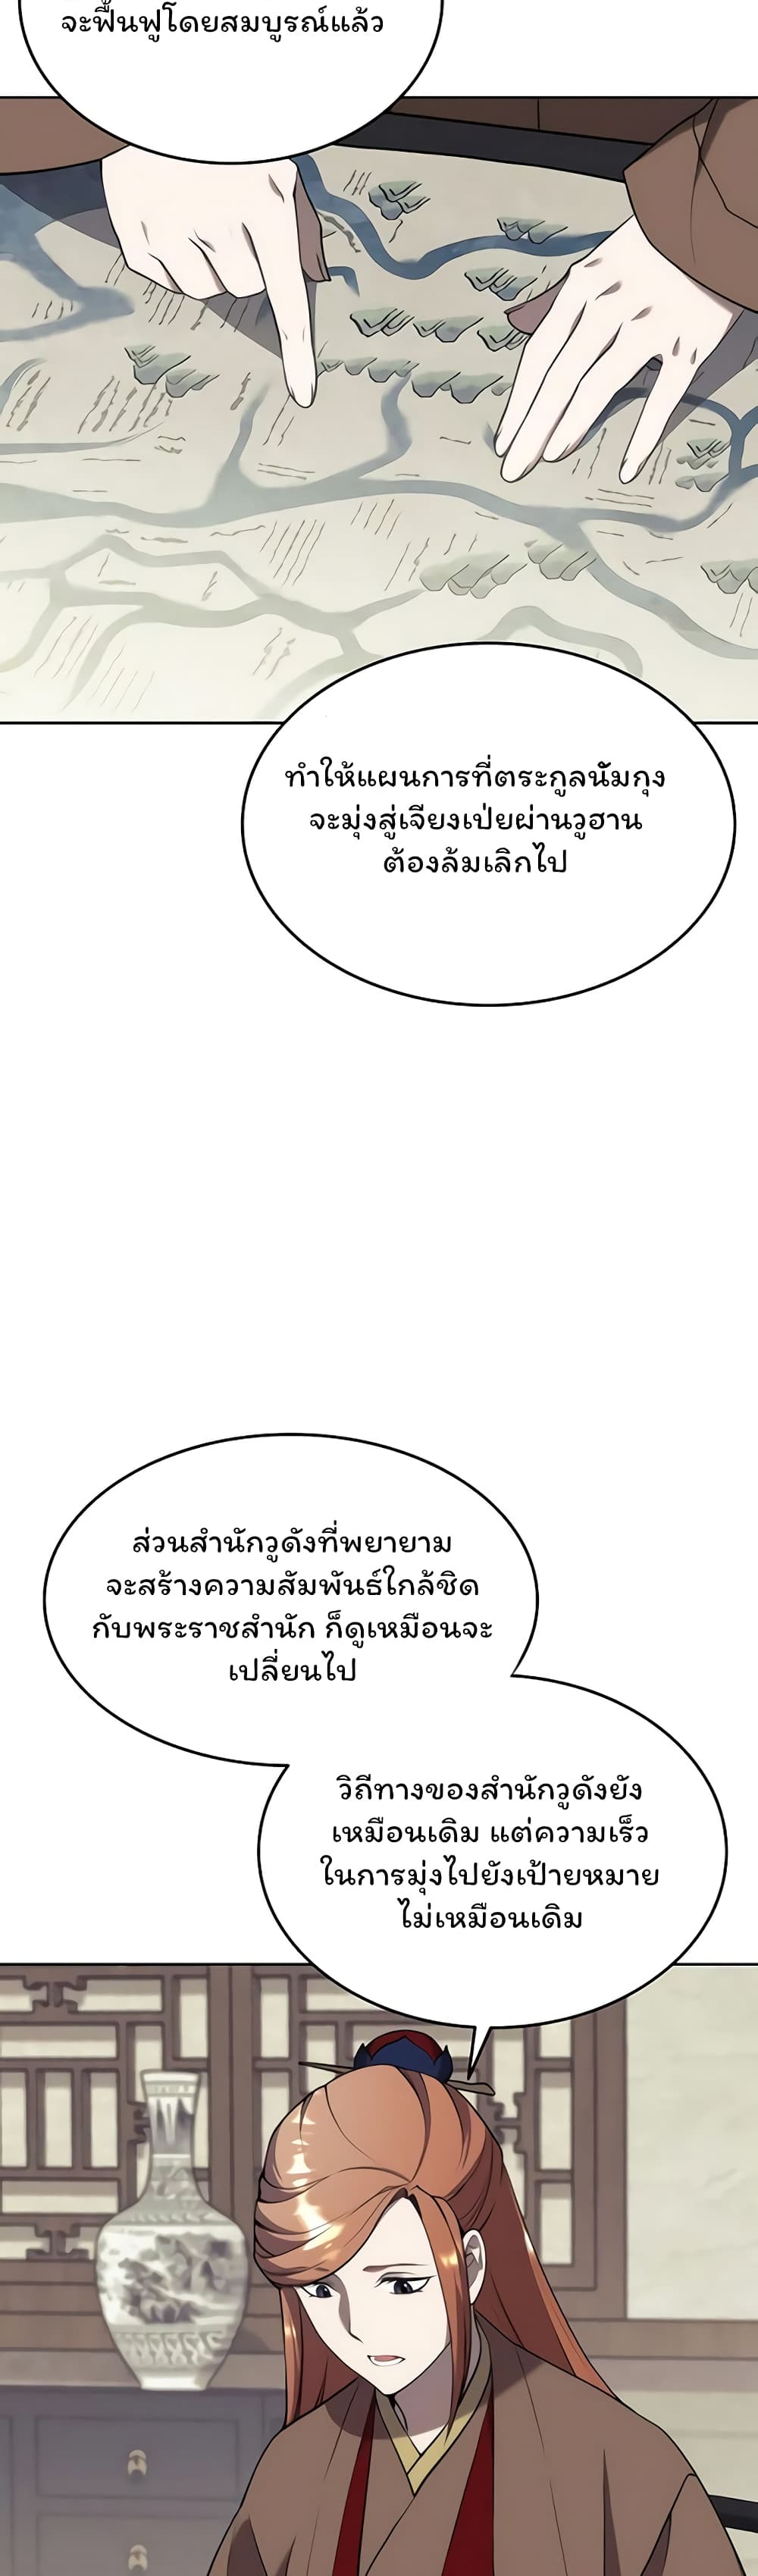 Tale of a Scribe Who Retires to the Countryside ตอนที่ 101 (16)